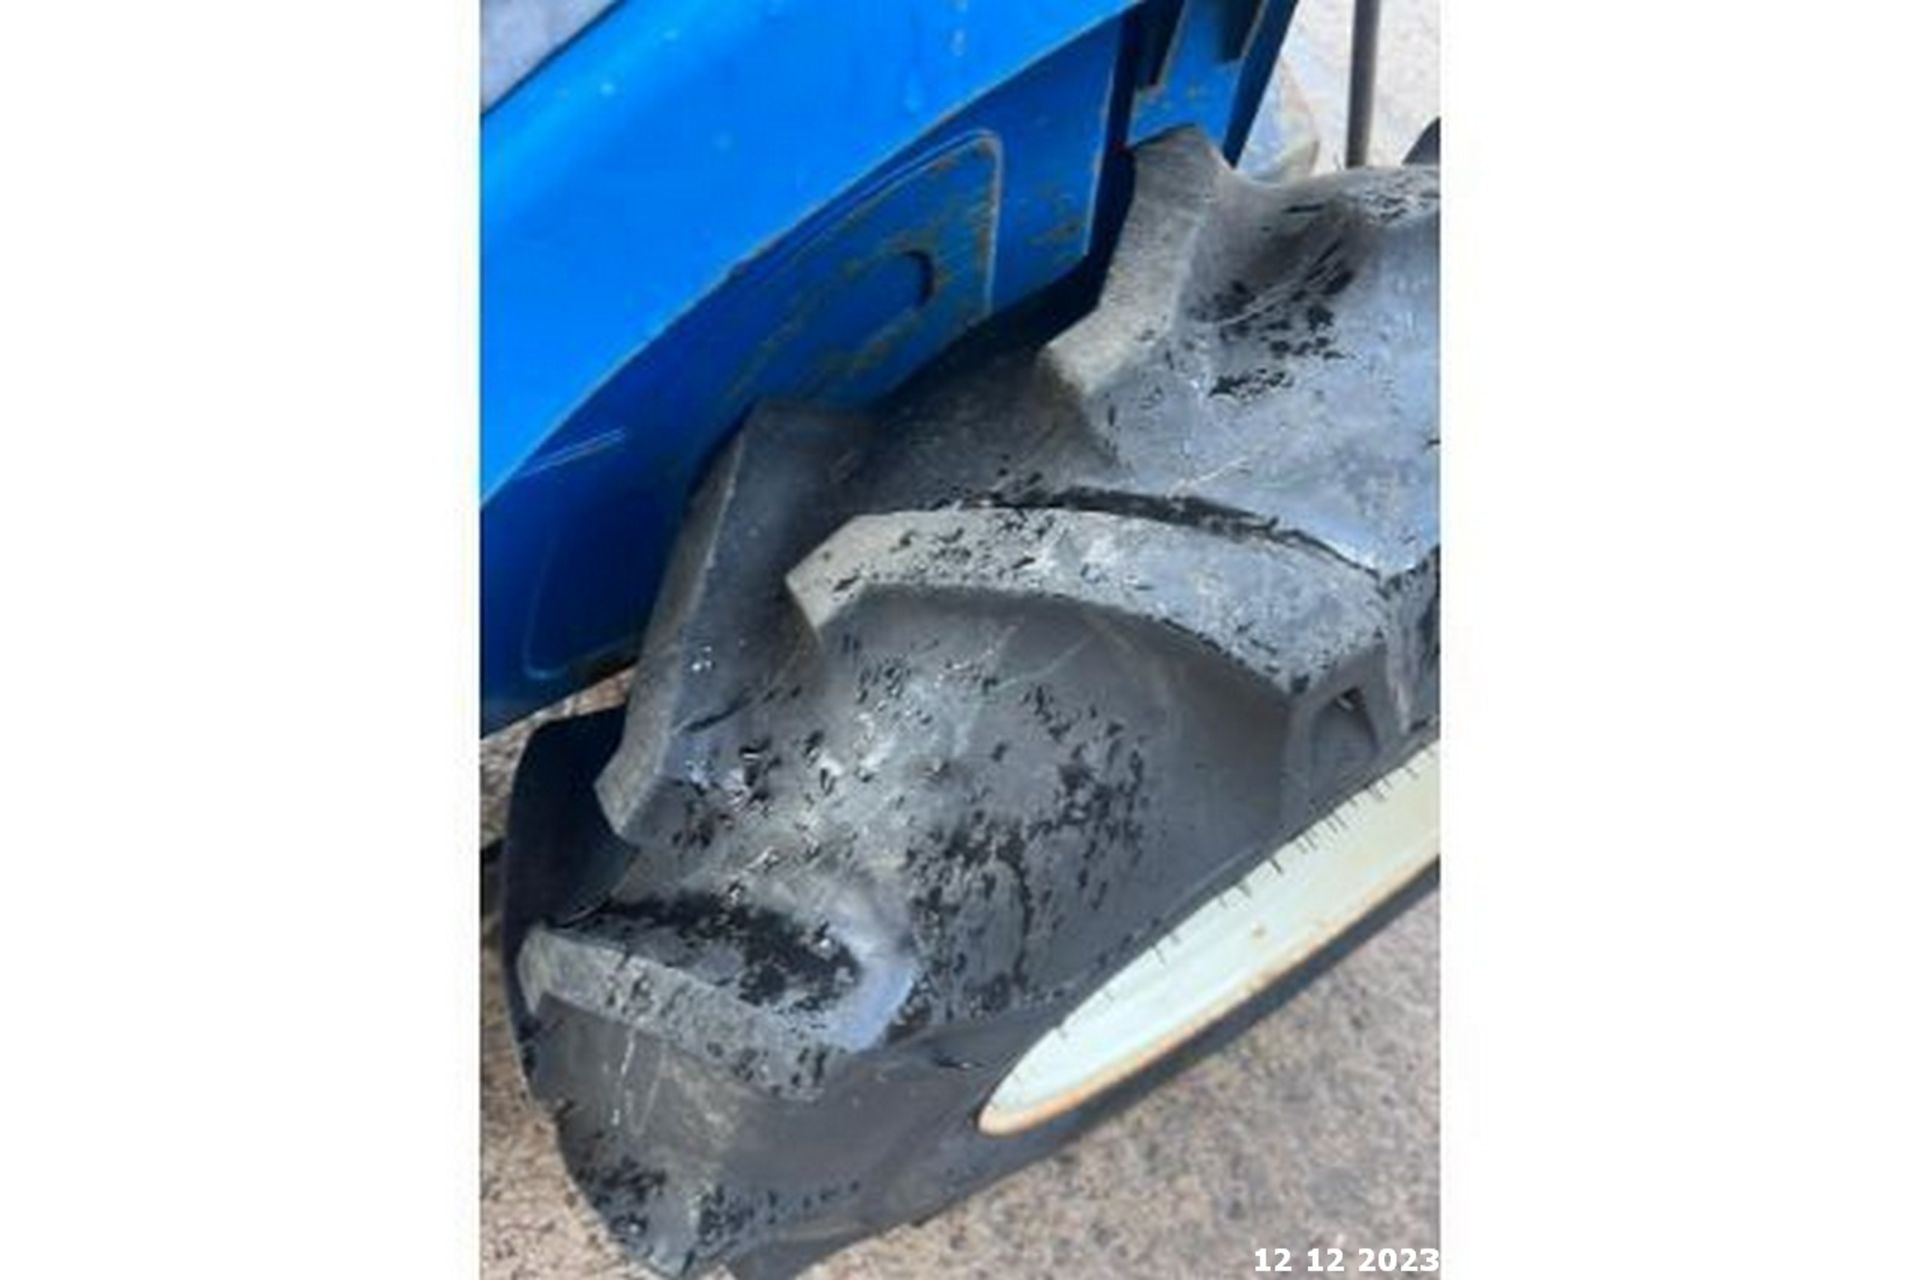 NEW HOLLAND TC21D COMPACT TRACTOR SHOWING 4028HRS - Image 21 of 21